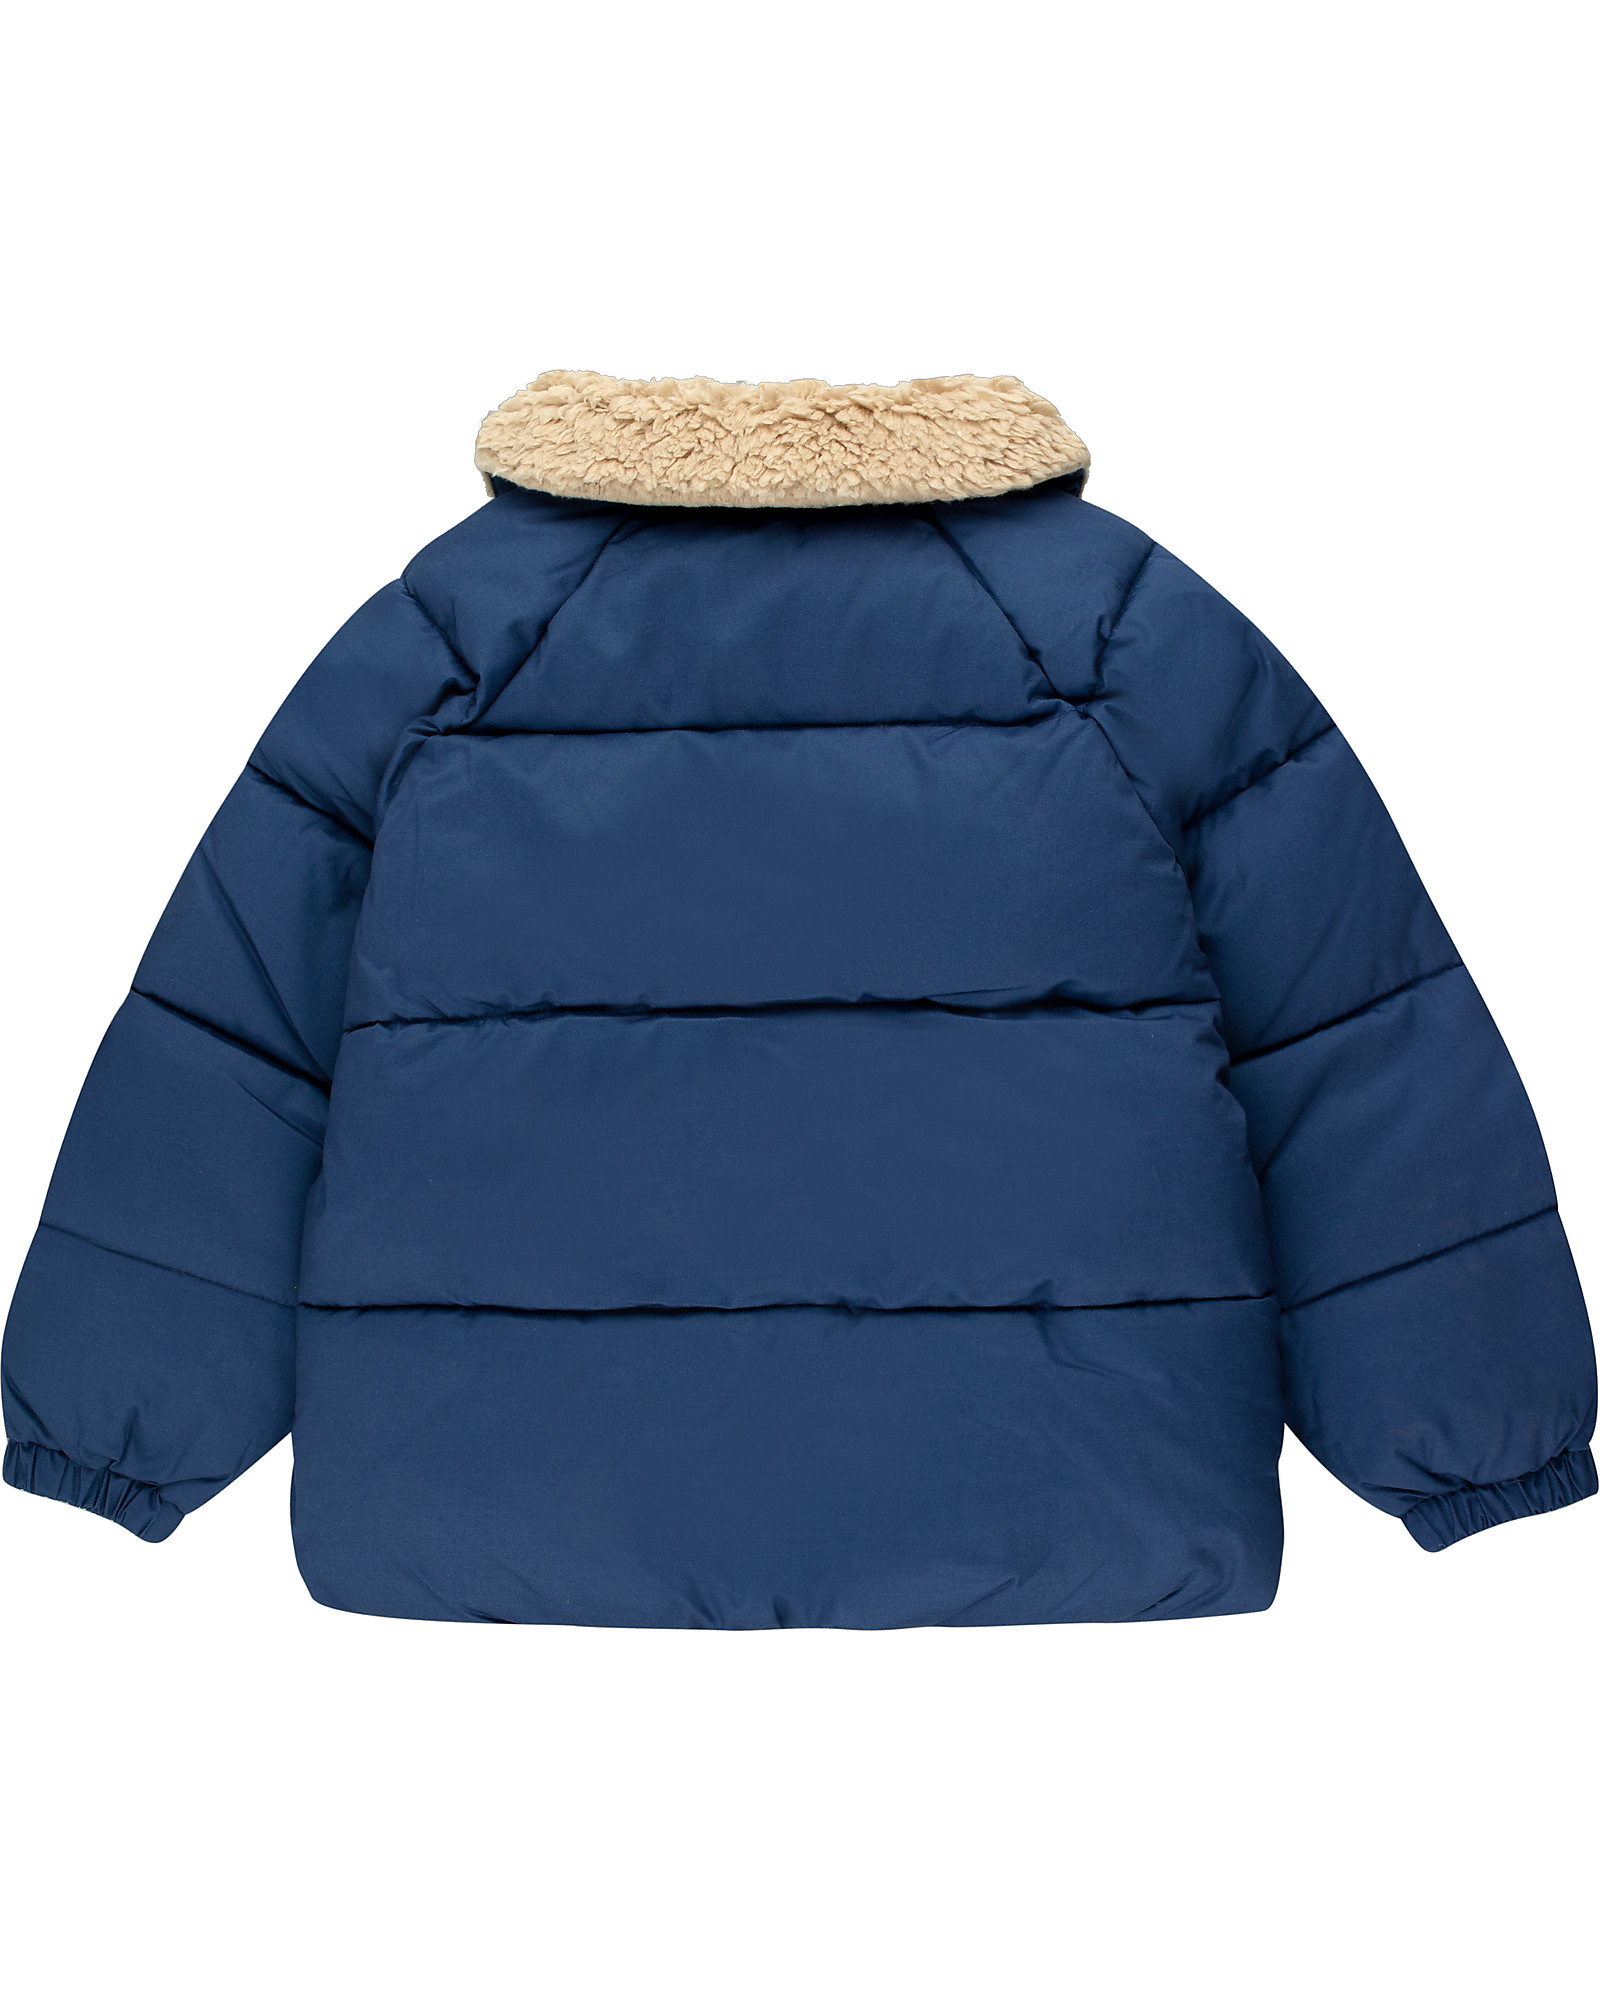 https://data.family-nation.com/imgprodotto/tiny-cottons-solid-padded-jacket-light-blue-windproof-and-waterproof-down-jacket_444953_zoom.jpg